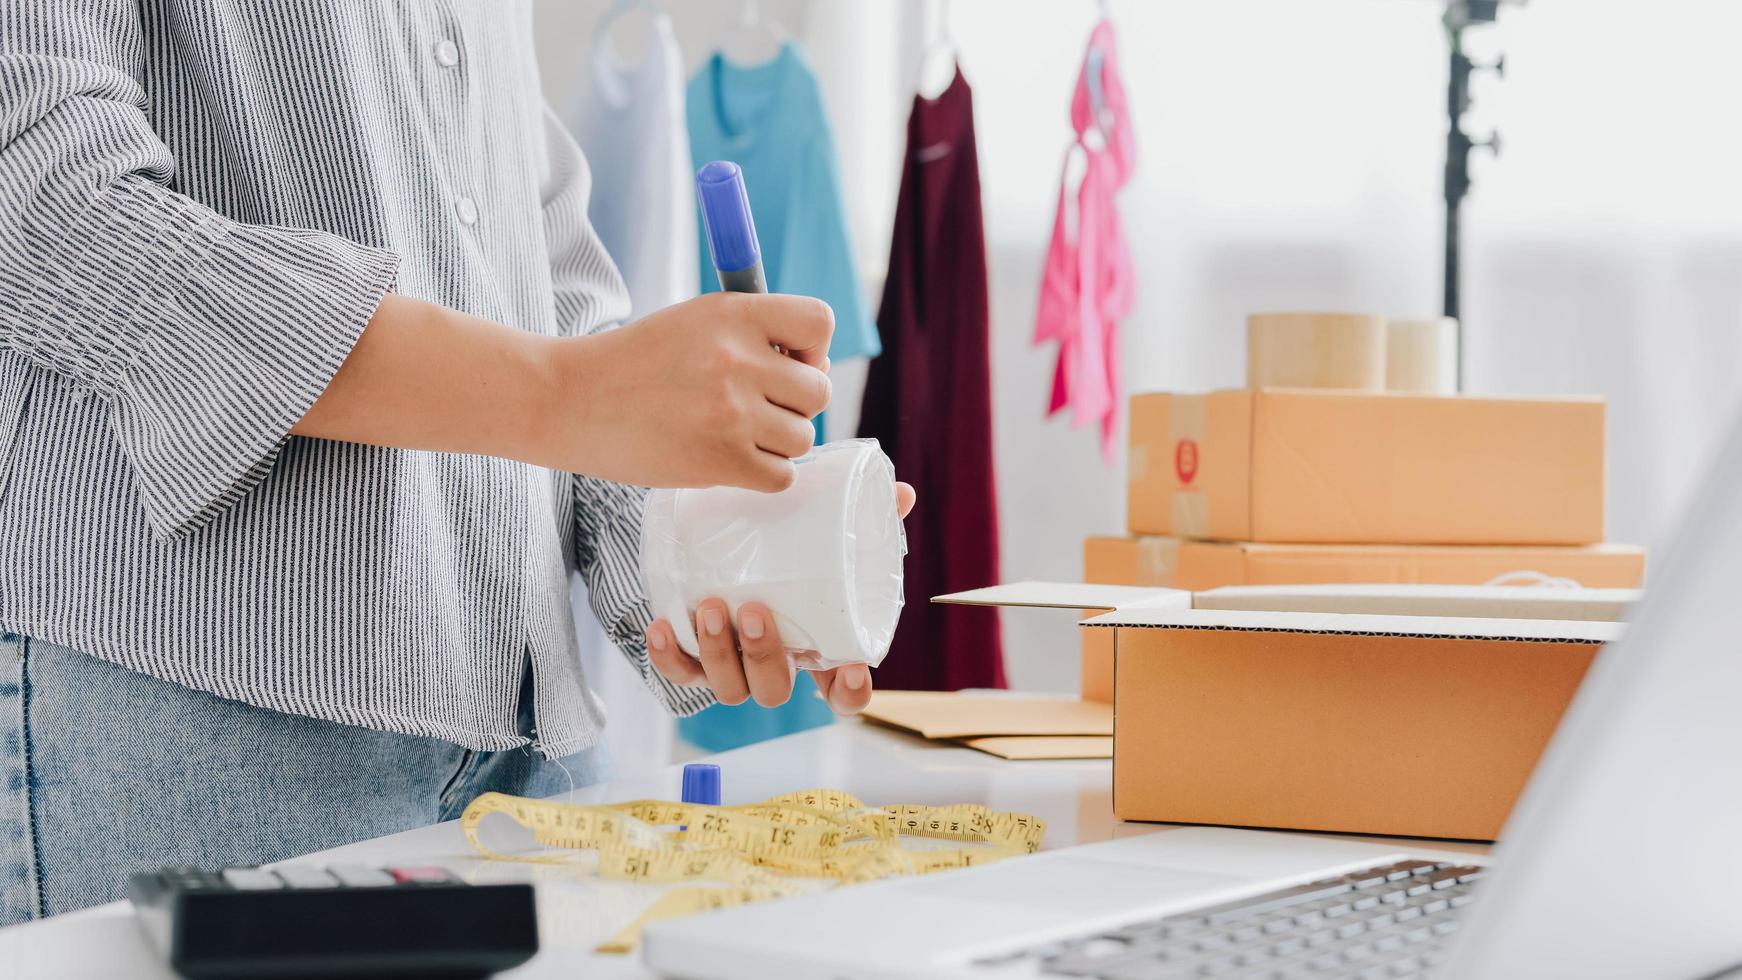 Closeup view of female's online store, small business owner seller, entrepreneur packing package, post shipping box preparing delivery parcel on the table, entrepreneurial self-employed business concept photo